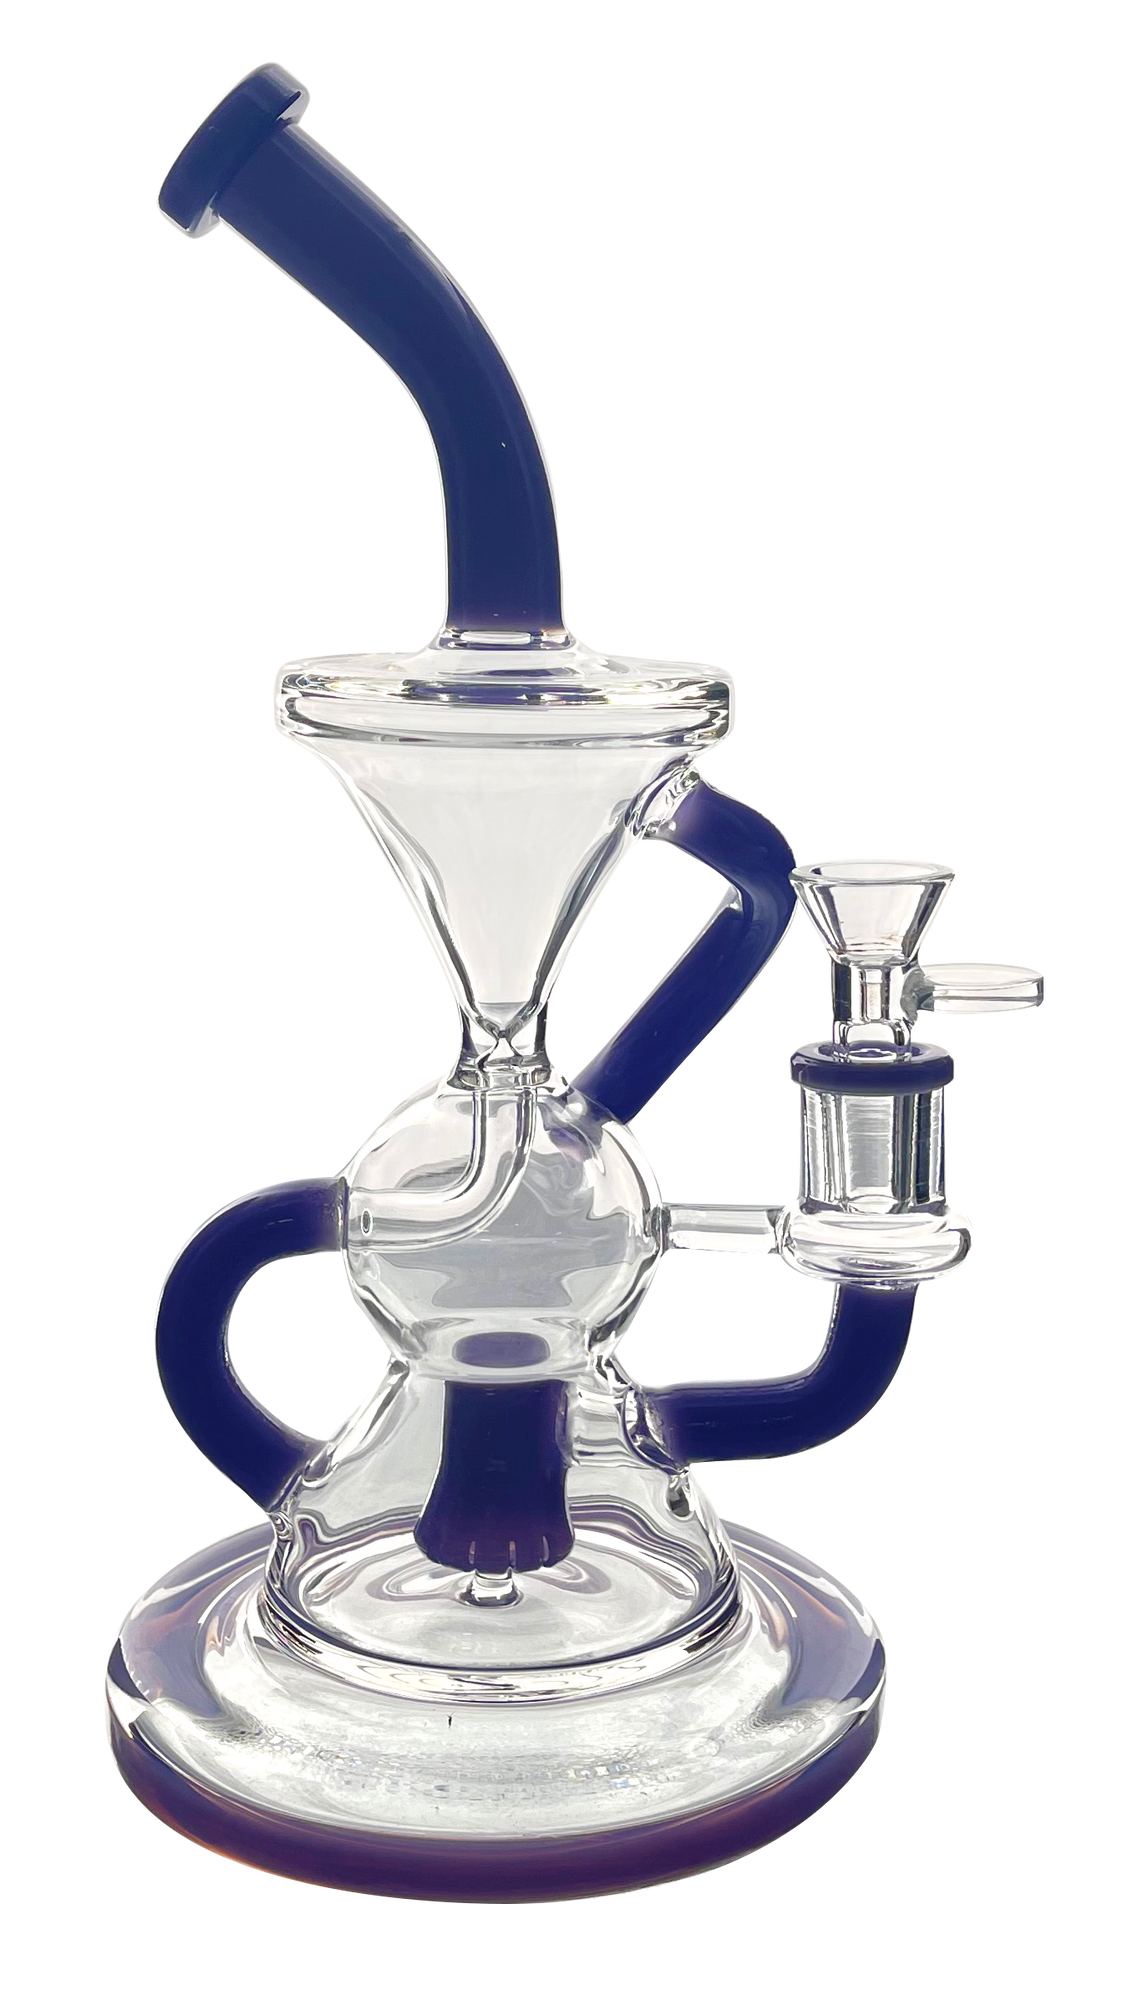 2 ARM RECYCLER WITH COLOR TUBE BEND MOUTHPIECE WITH SHOWERHEAD PERC